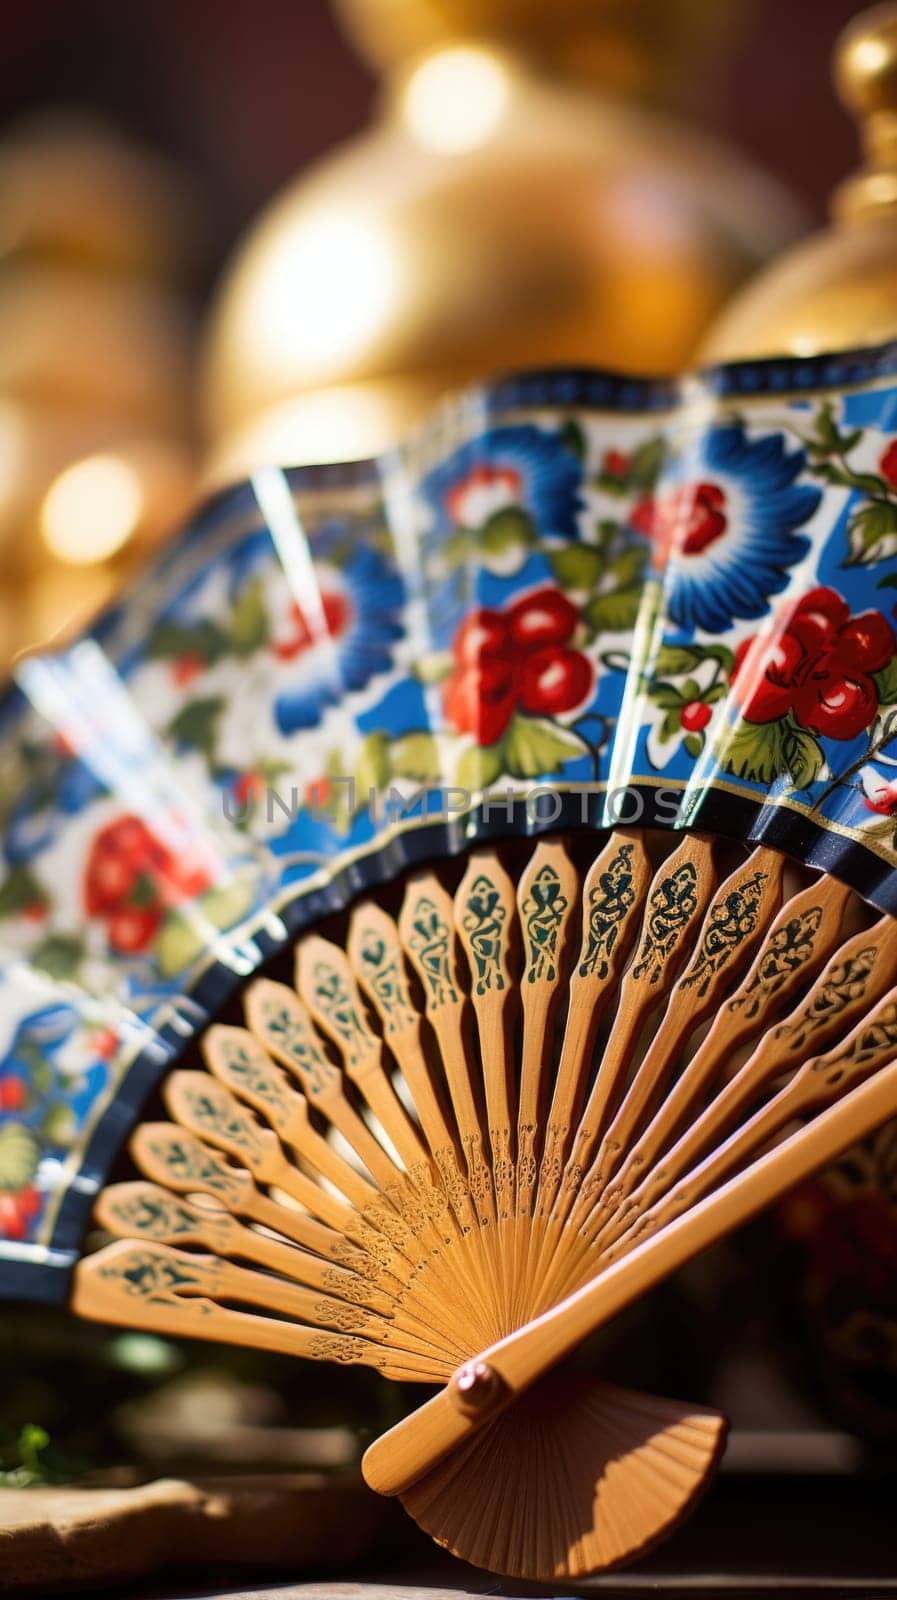 A close up of a fan with colorful designs